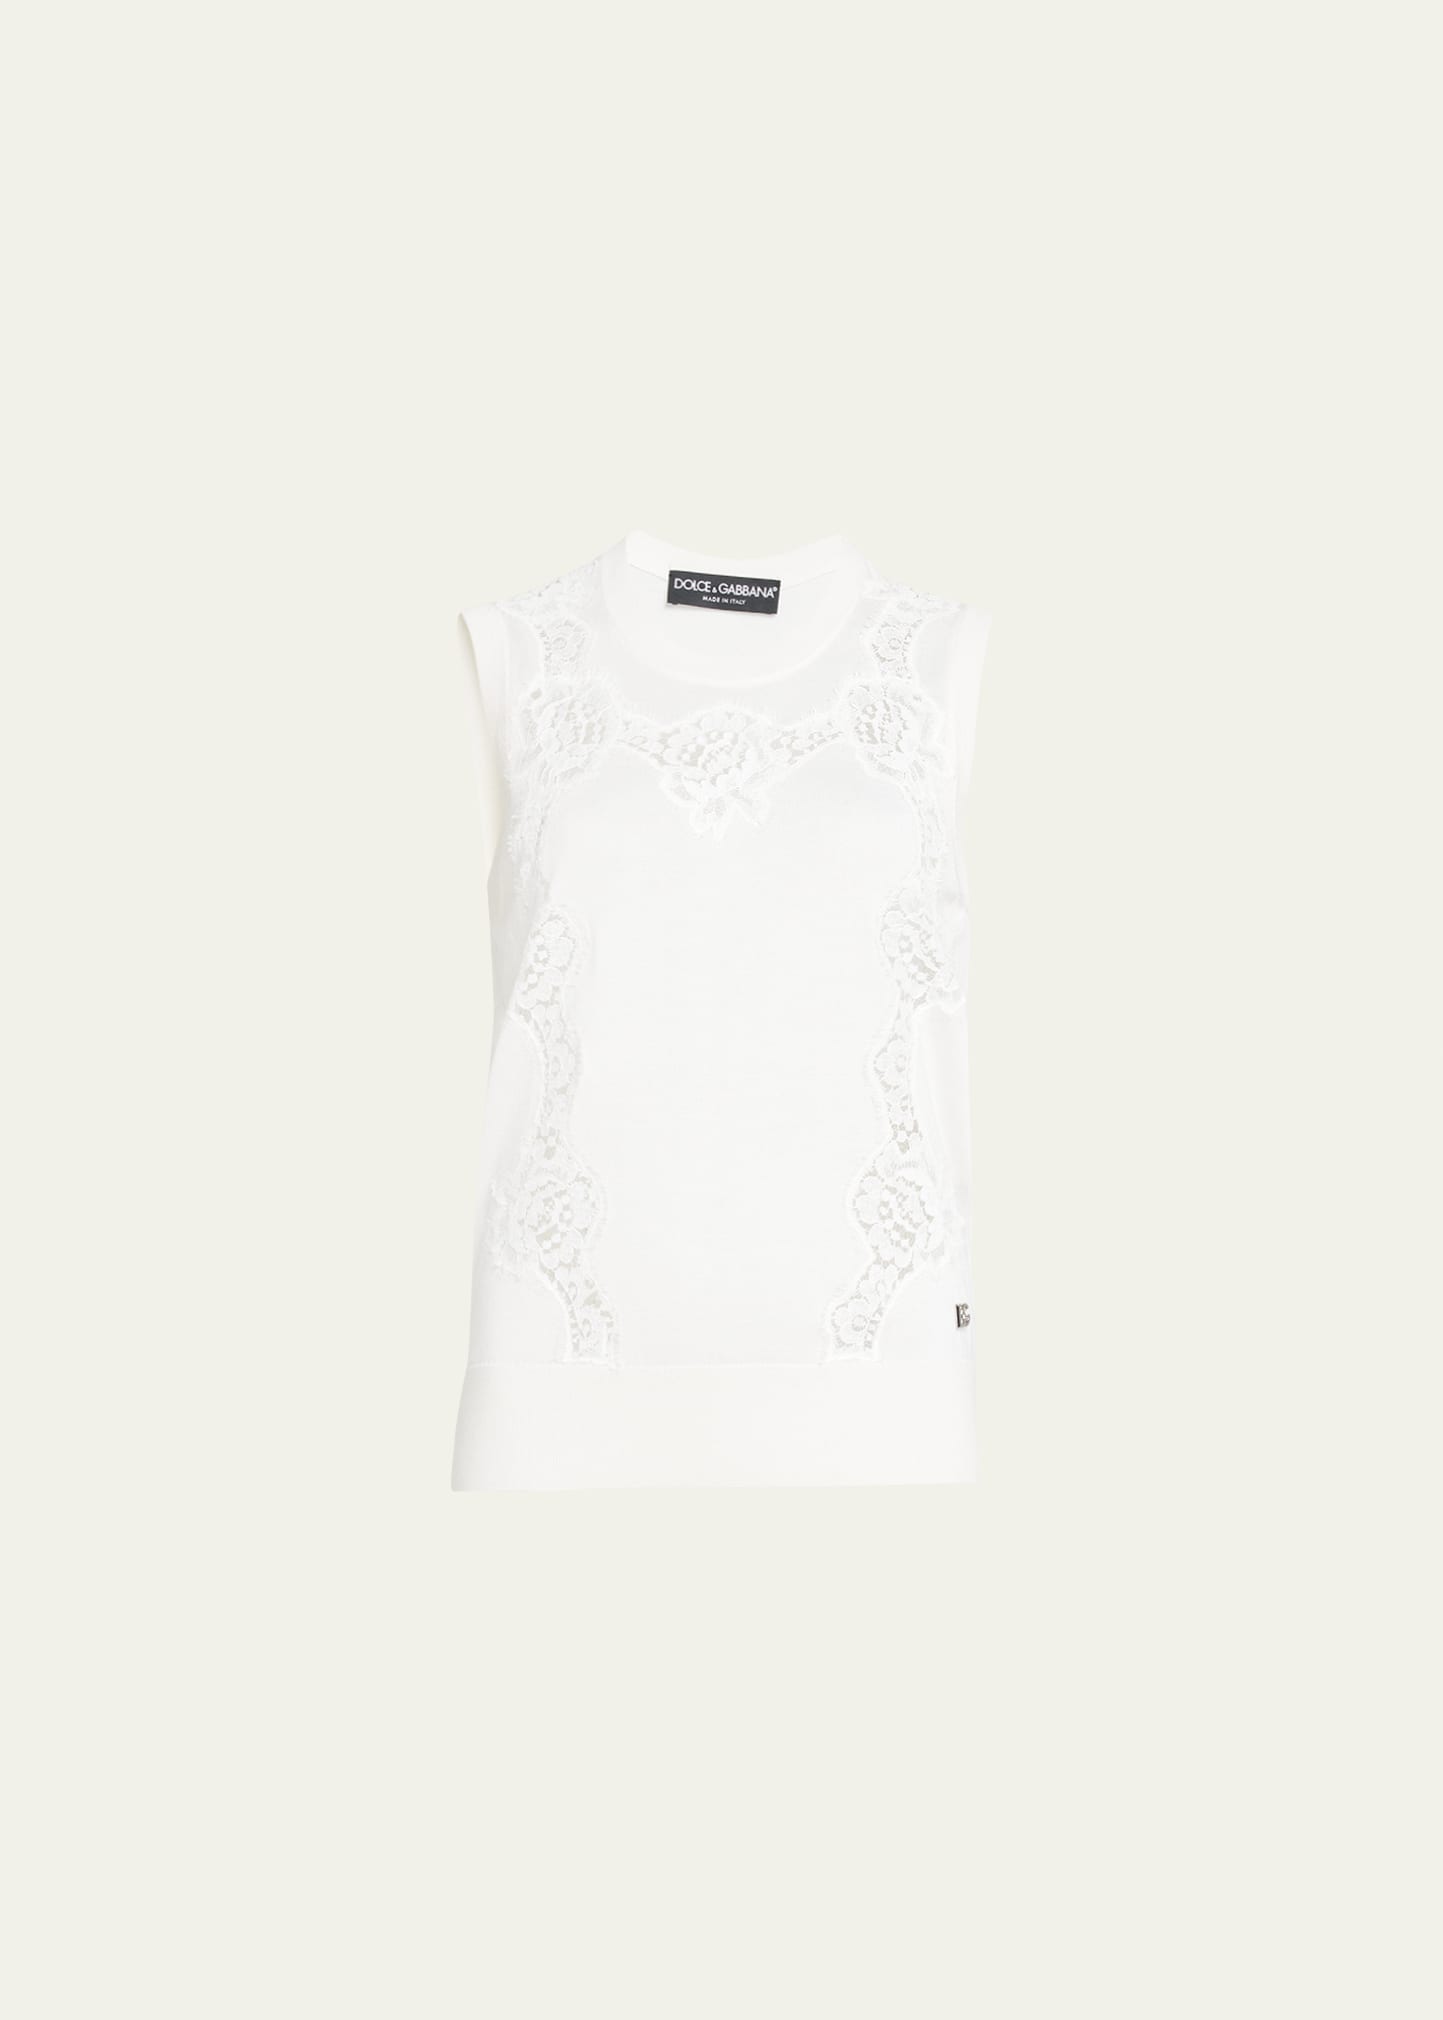 DOLCE & GABBANA KNIT TANK TOP WITH LACE INSET DETAIL